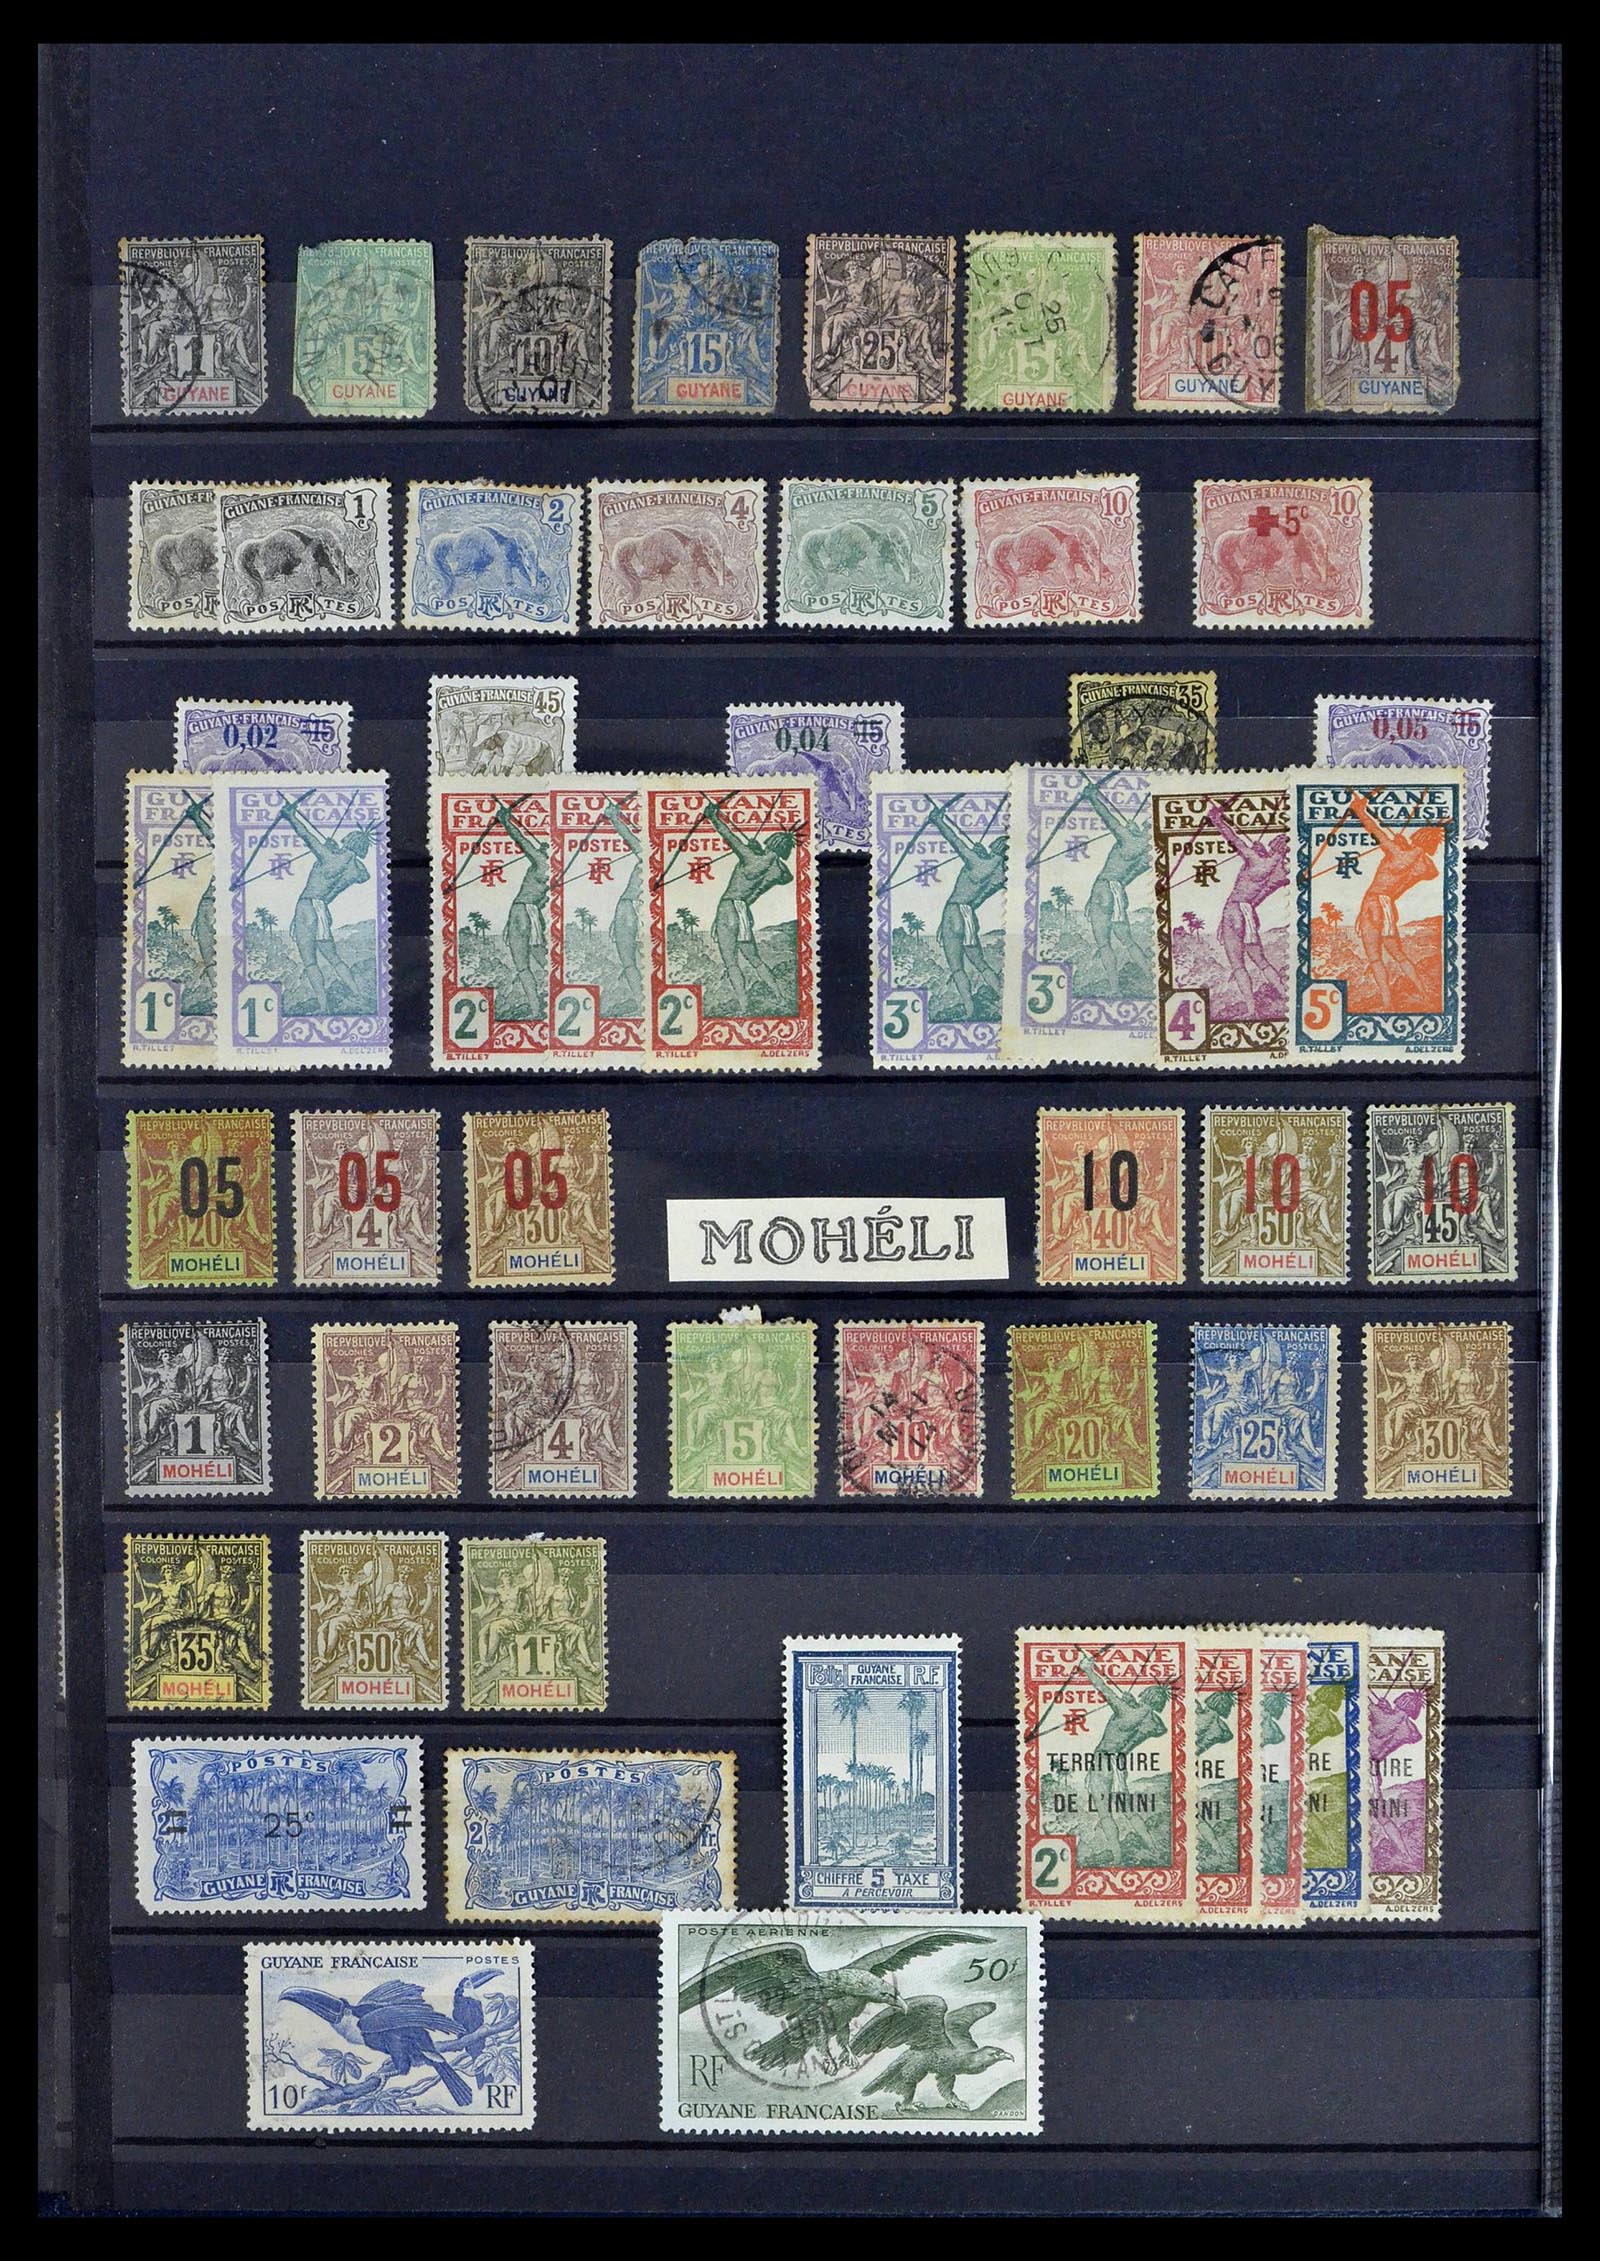 39097 0004 - Stamp collection 39097 French colonies 1880-2000.